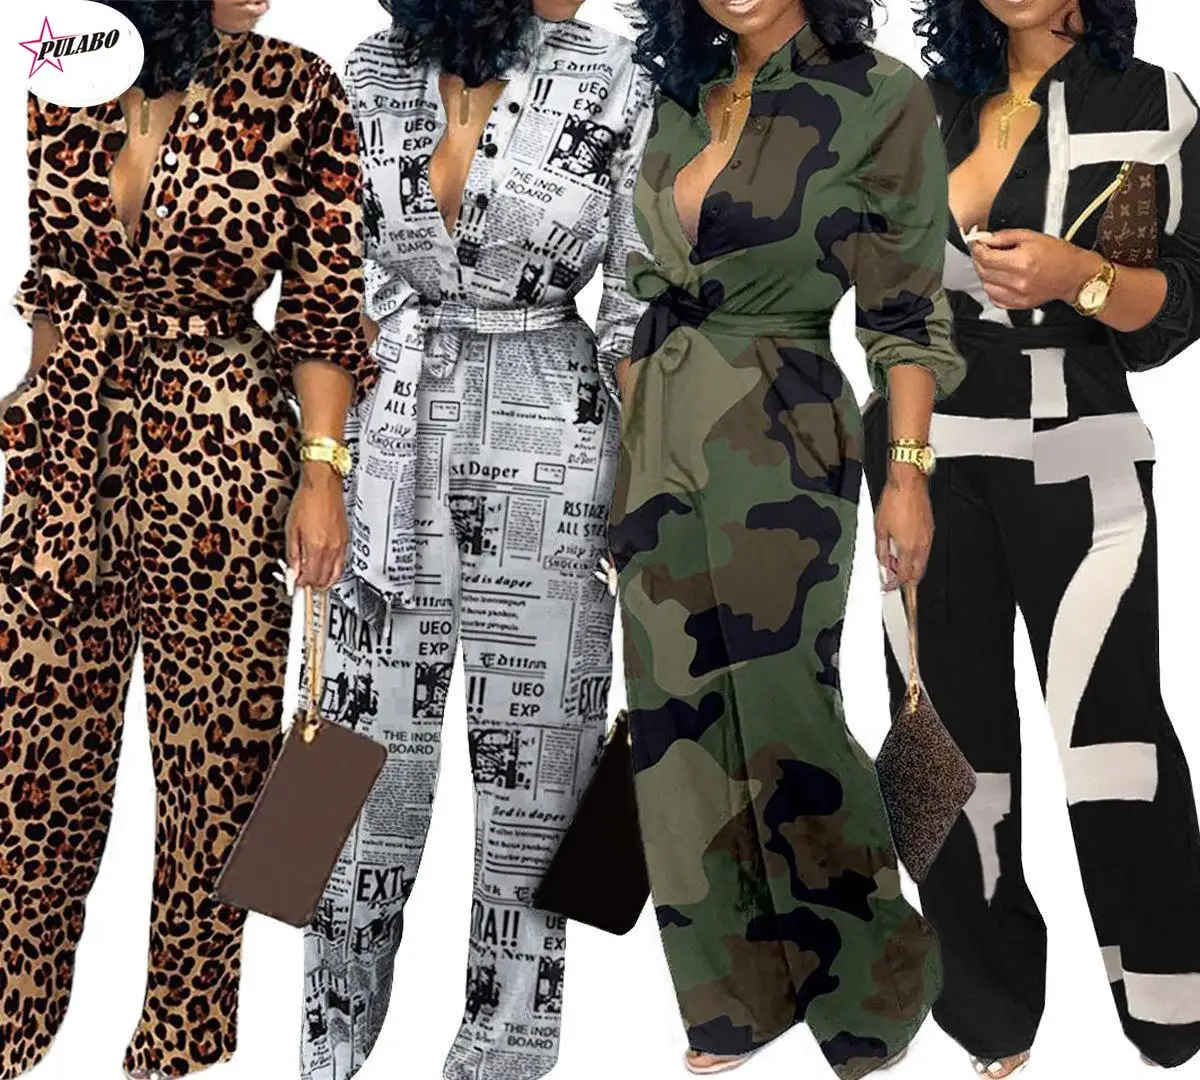 

PULABO Leopard Tied Waist Long Sleeve Jumpsuit Women Rompers Fashion One Piece Overalls Casual Jumpsuits Streetwear Dropshipping